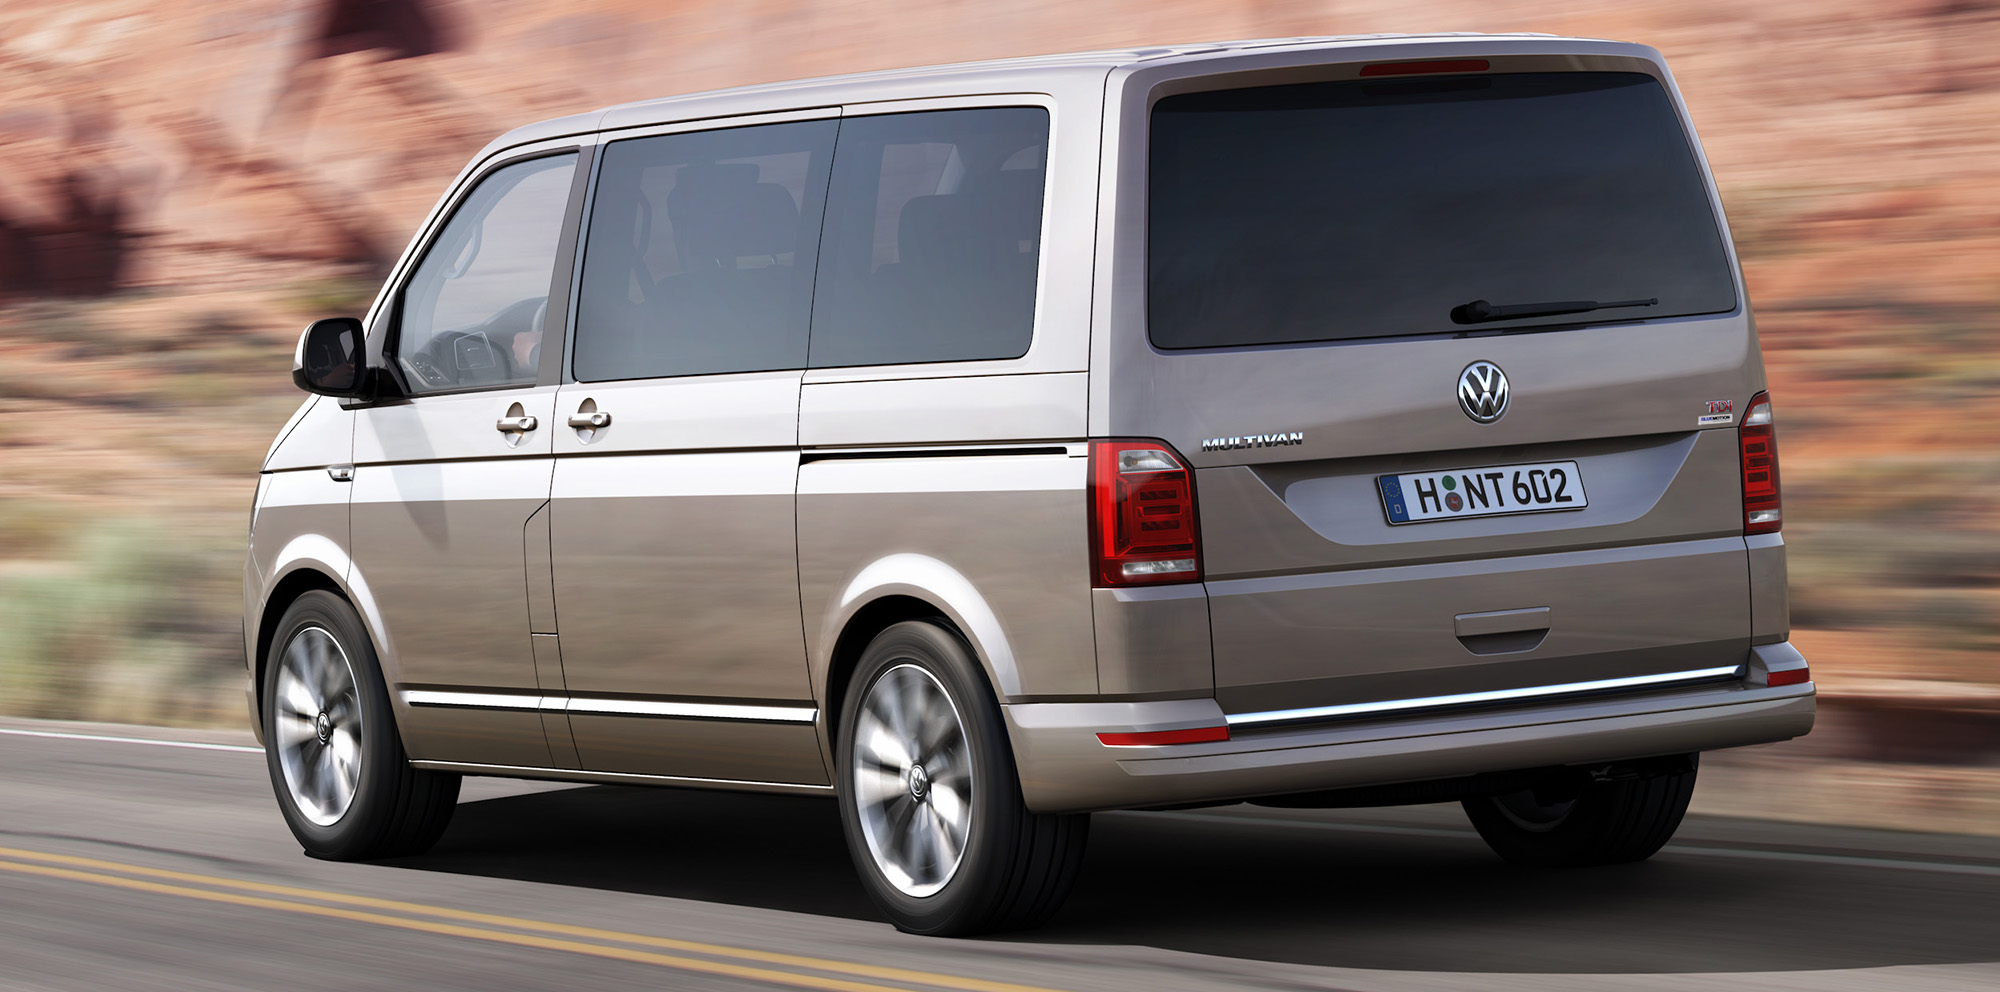 Volkswagen T6 Transporter unveiled photos CarAdvice